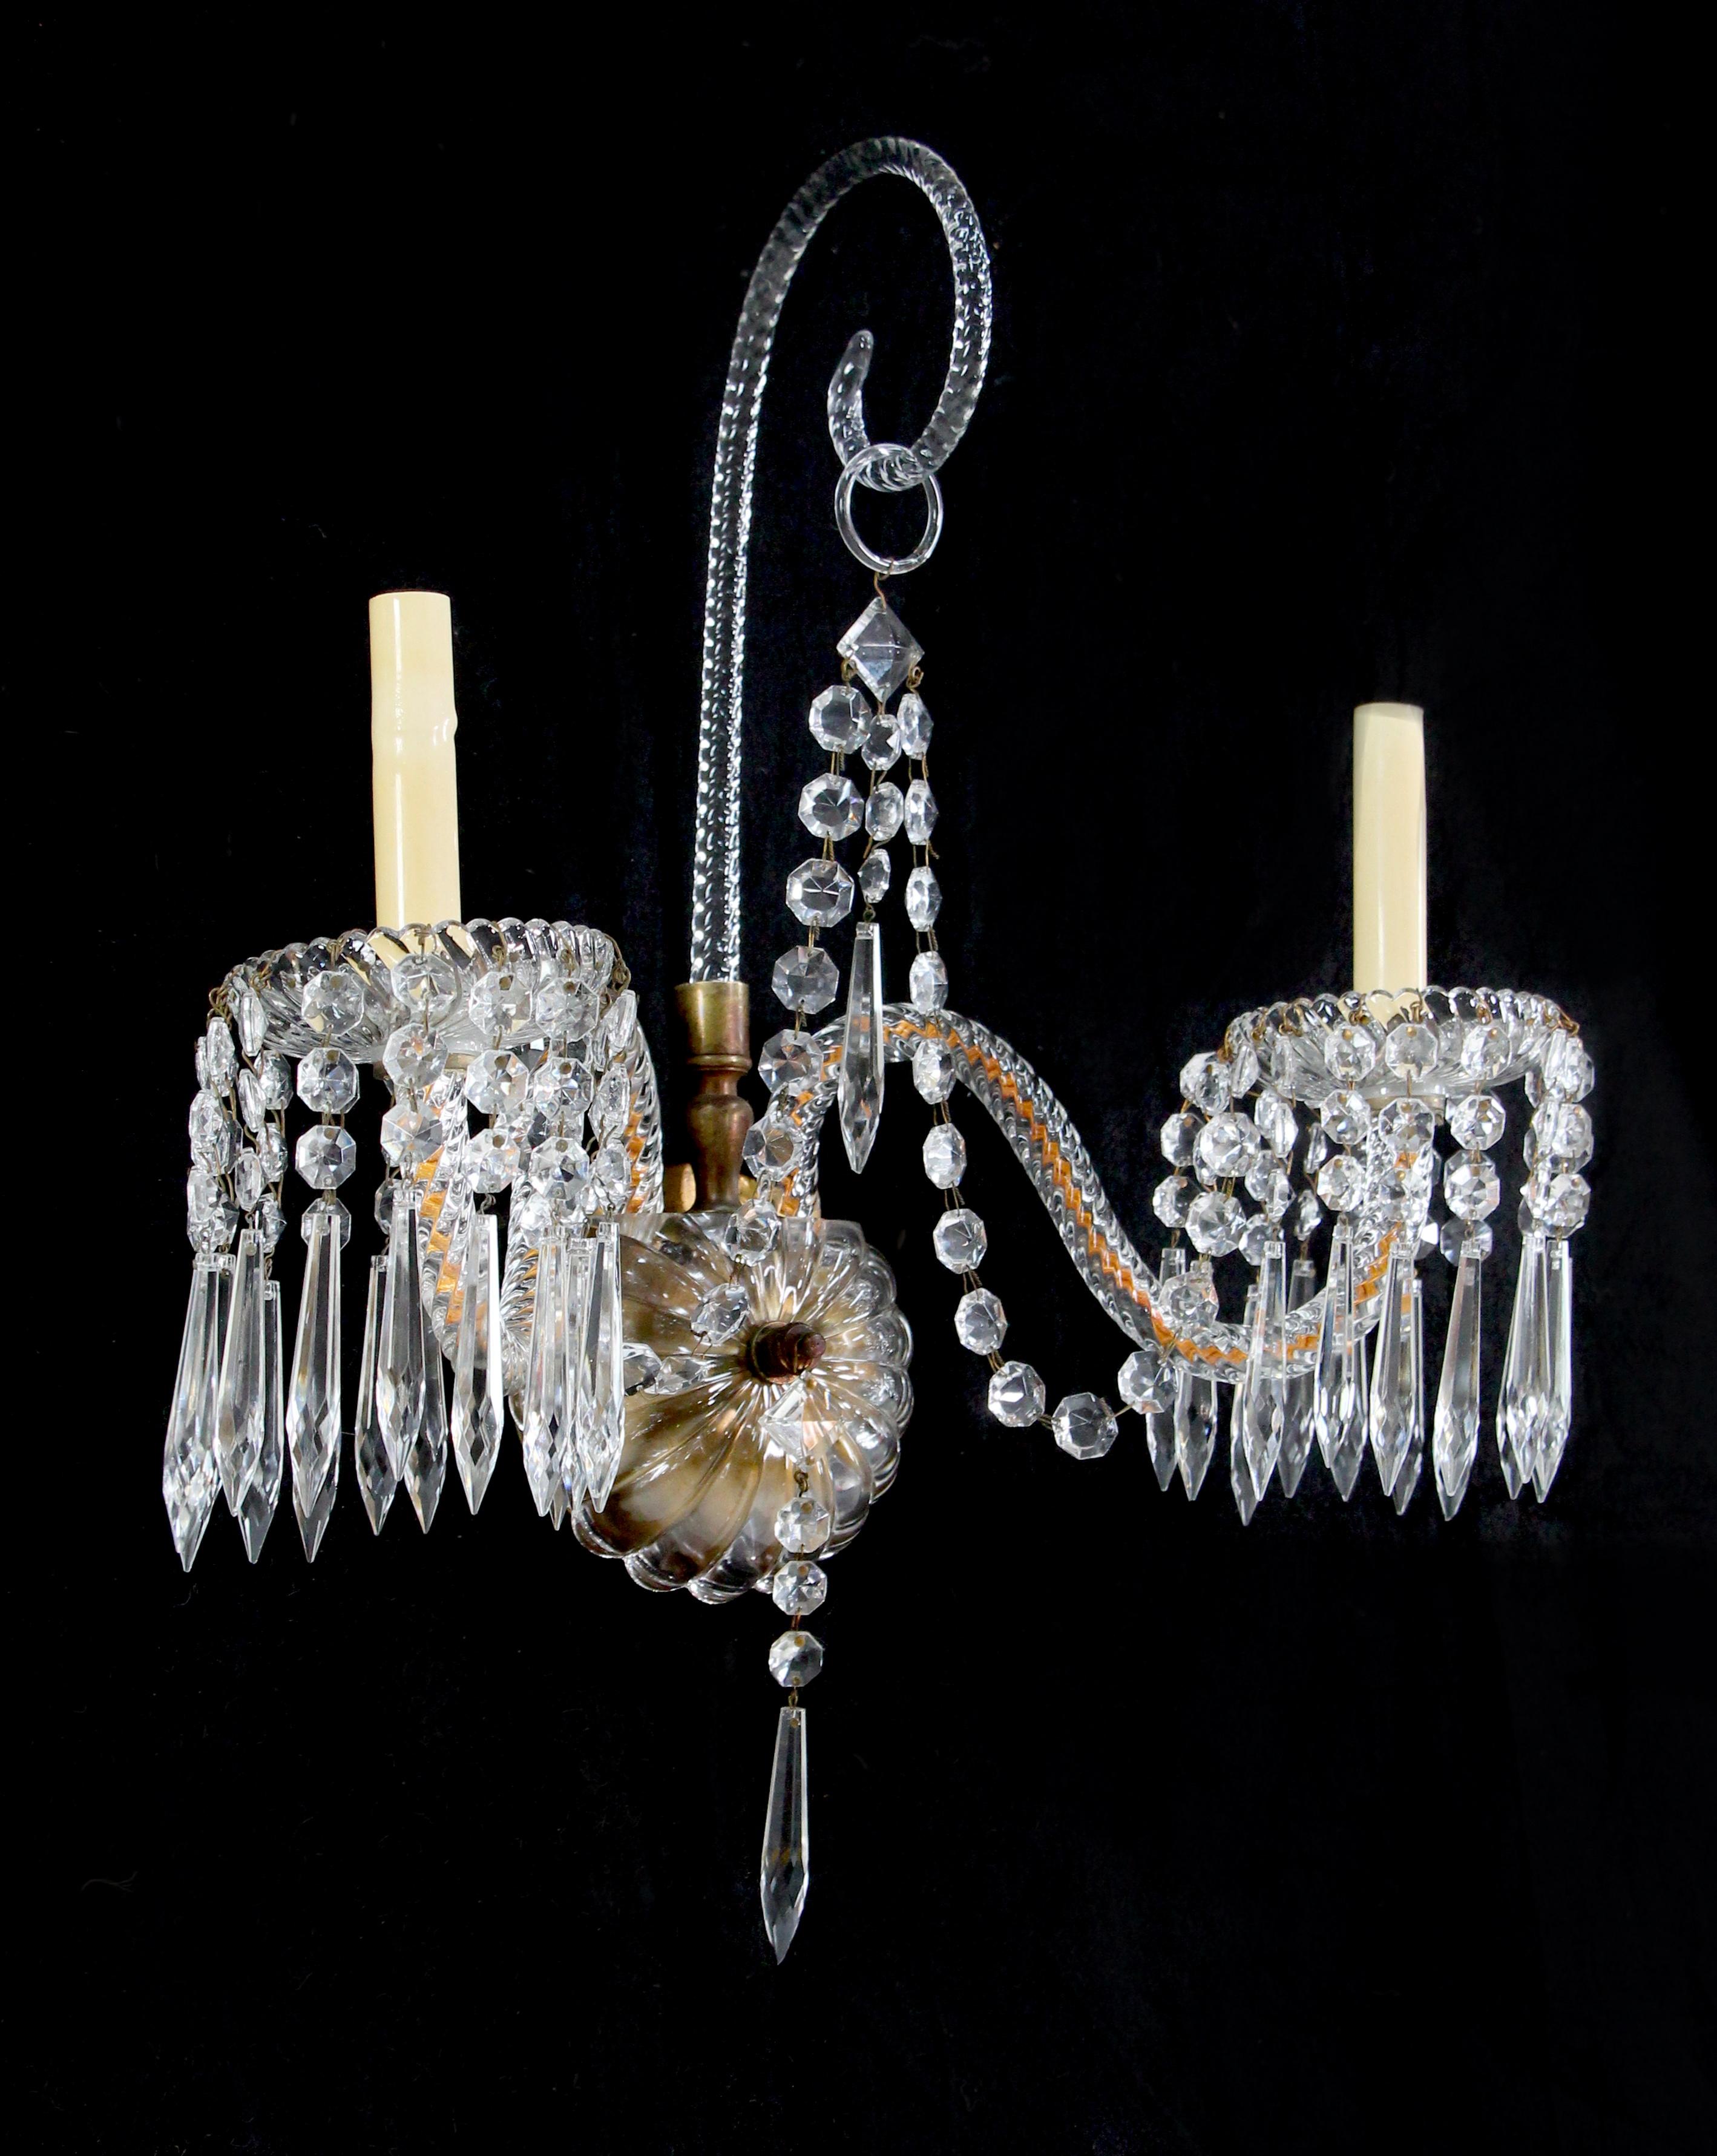 Early 20th Century 1920s Bronze and Crystal 2 Arm Sconce from a Historic Mid-Town NYC Hotel Qty Ava